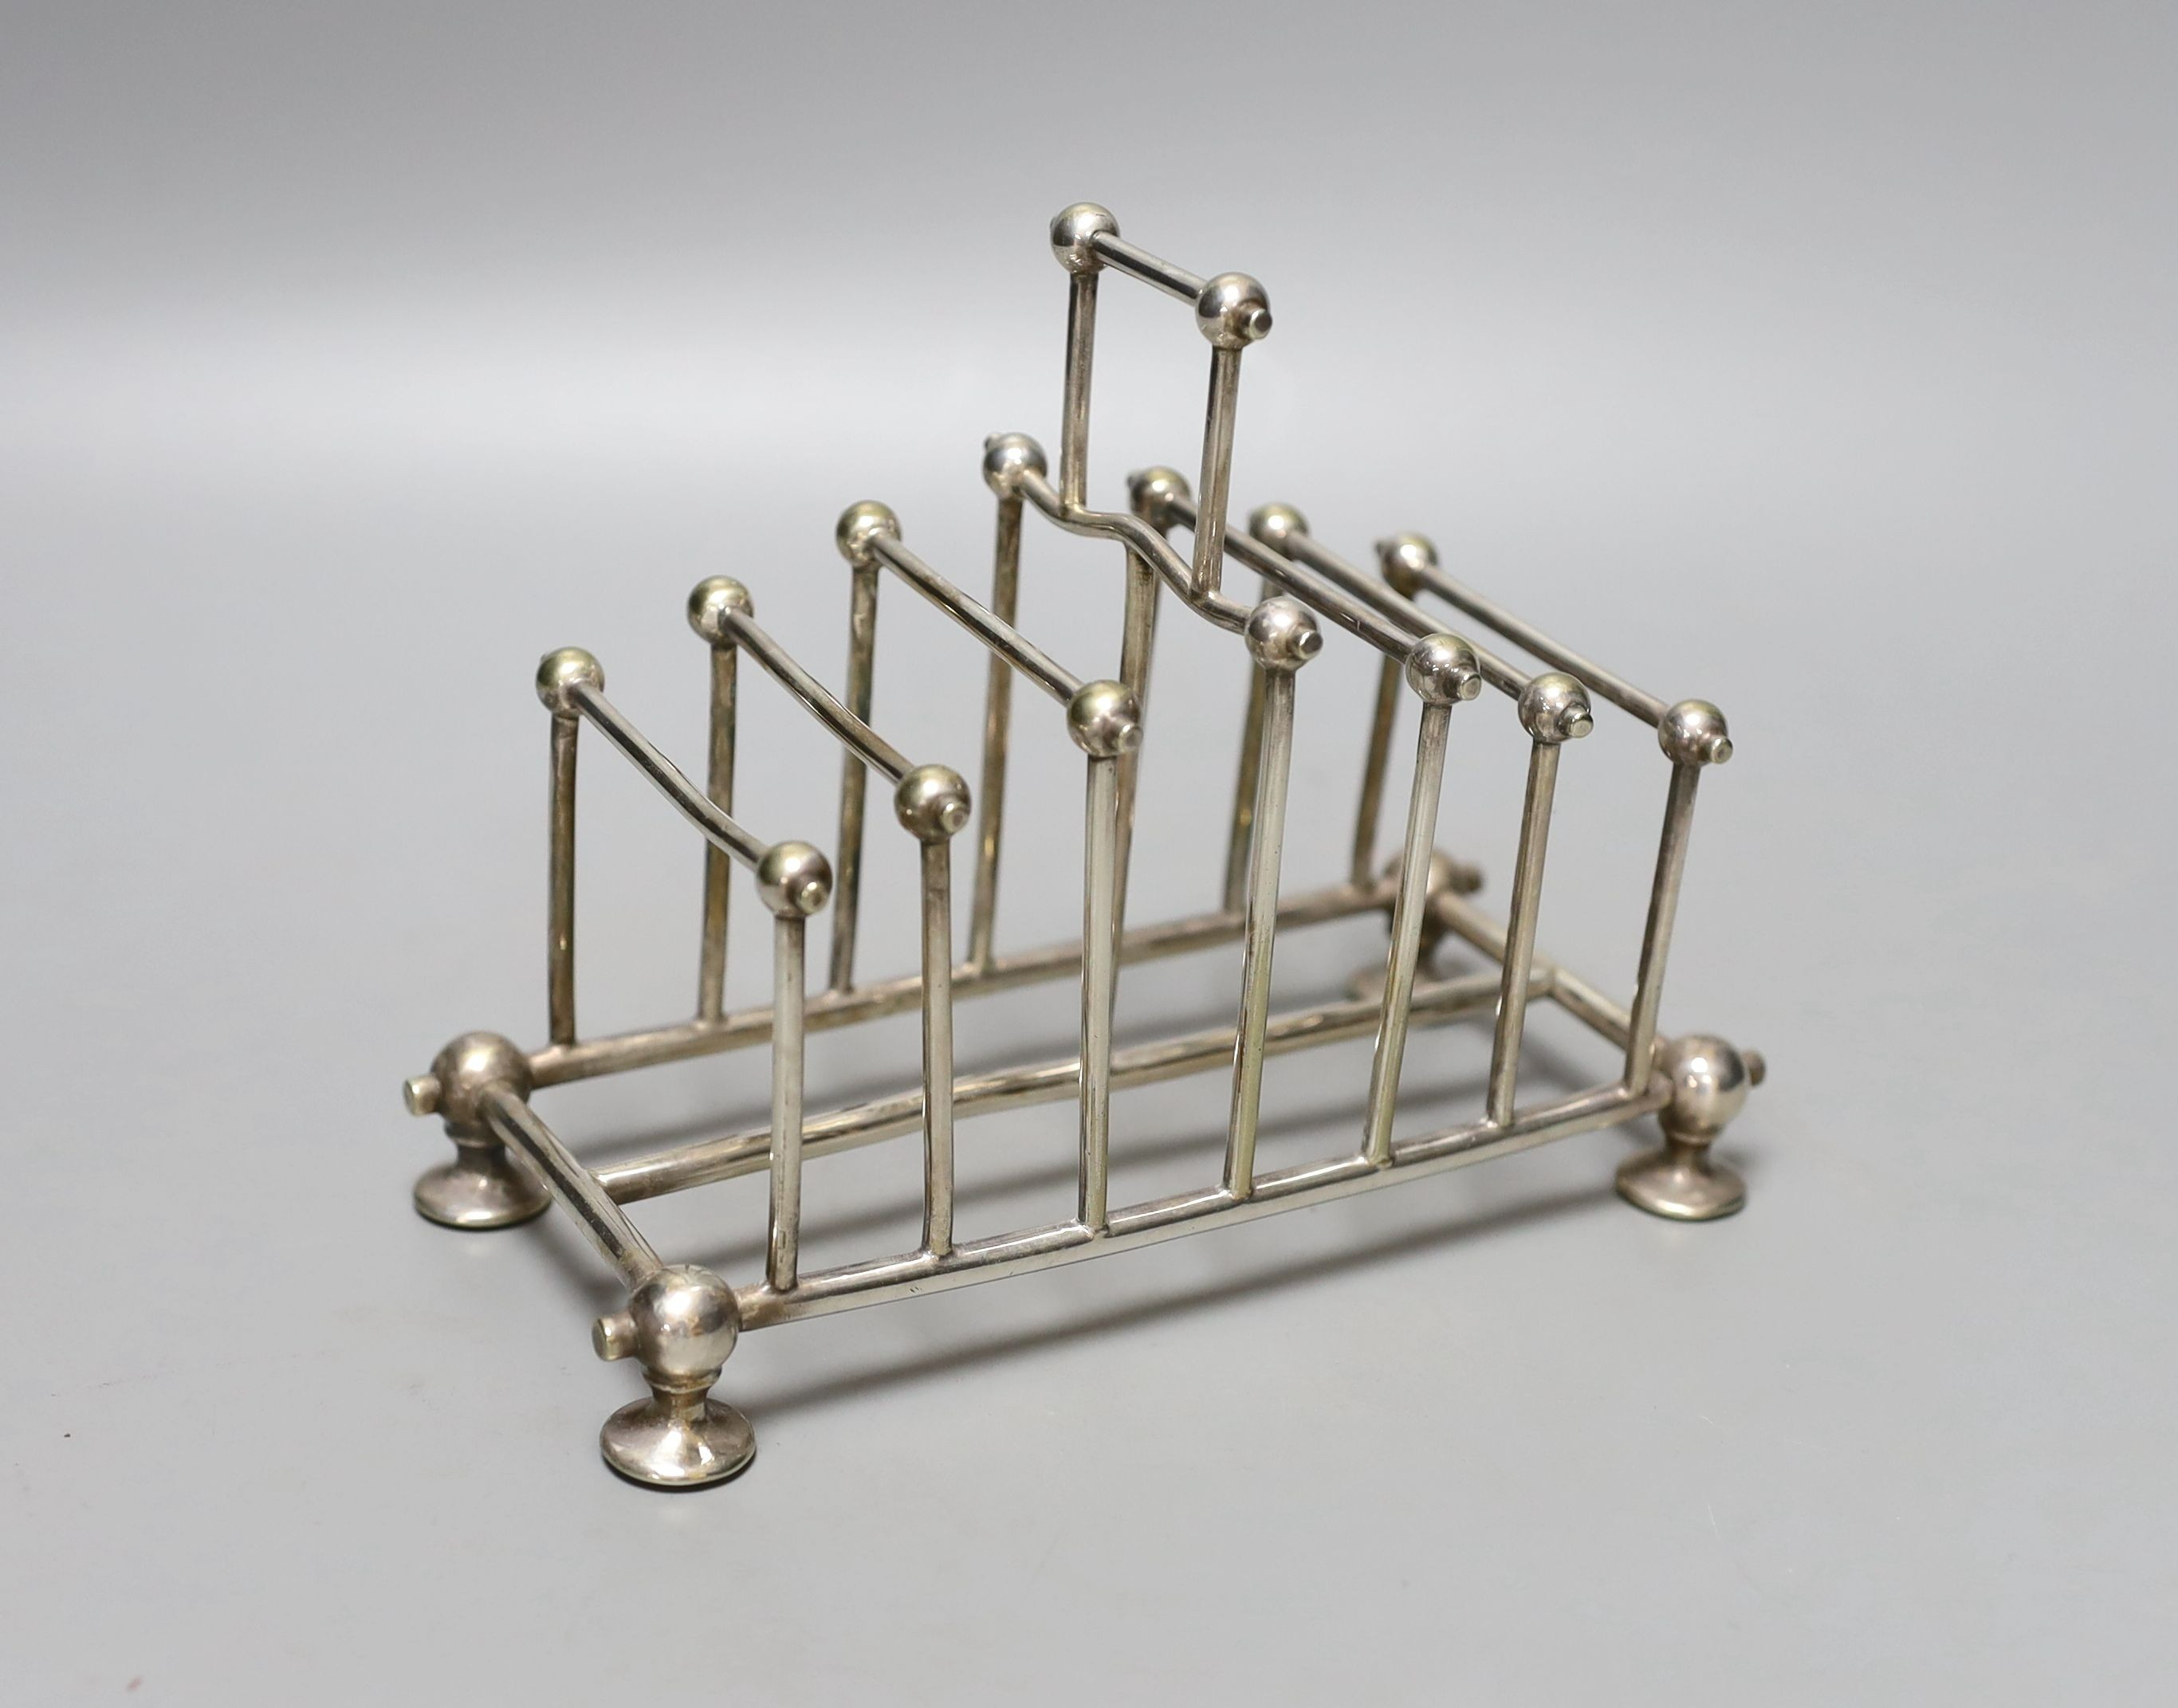 A late Victorian silver plated graduated seven bar toastrack, in the manner of Christopher Dresser, by William Hutton & Sons, length 16.4cm.